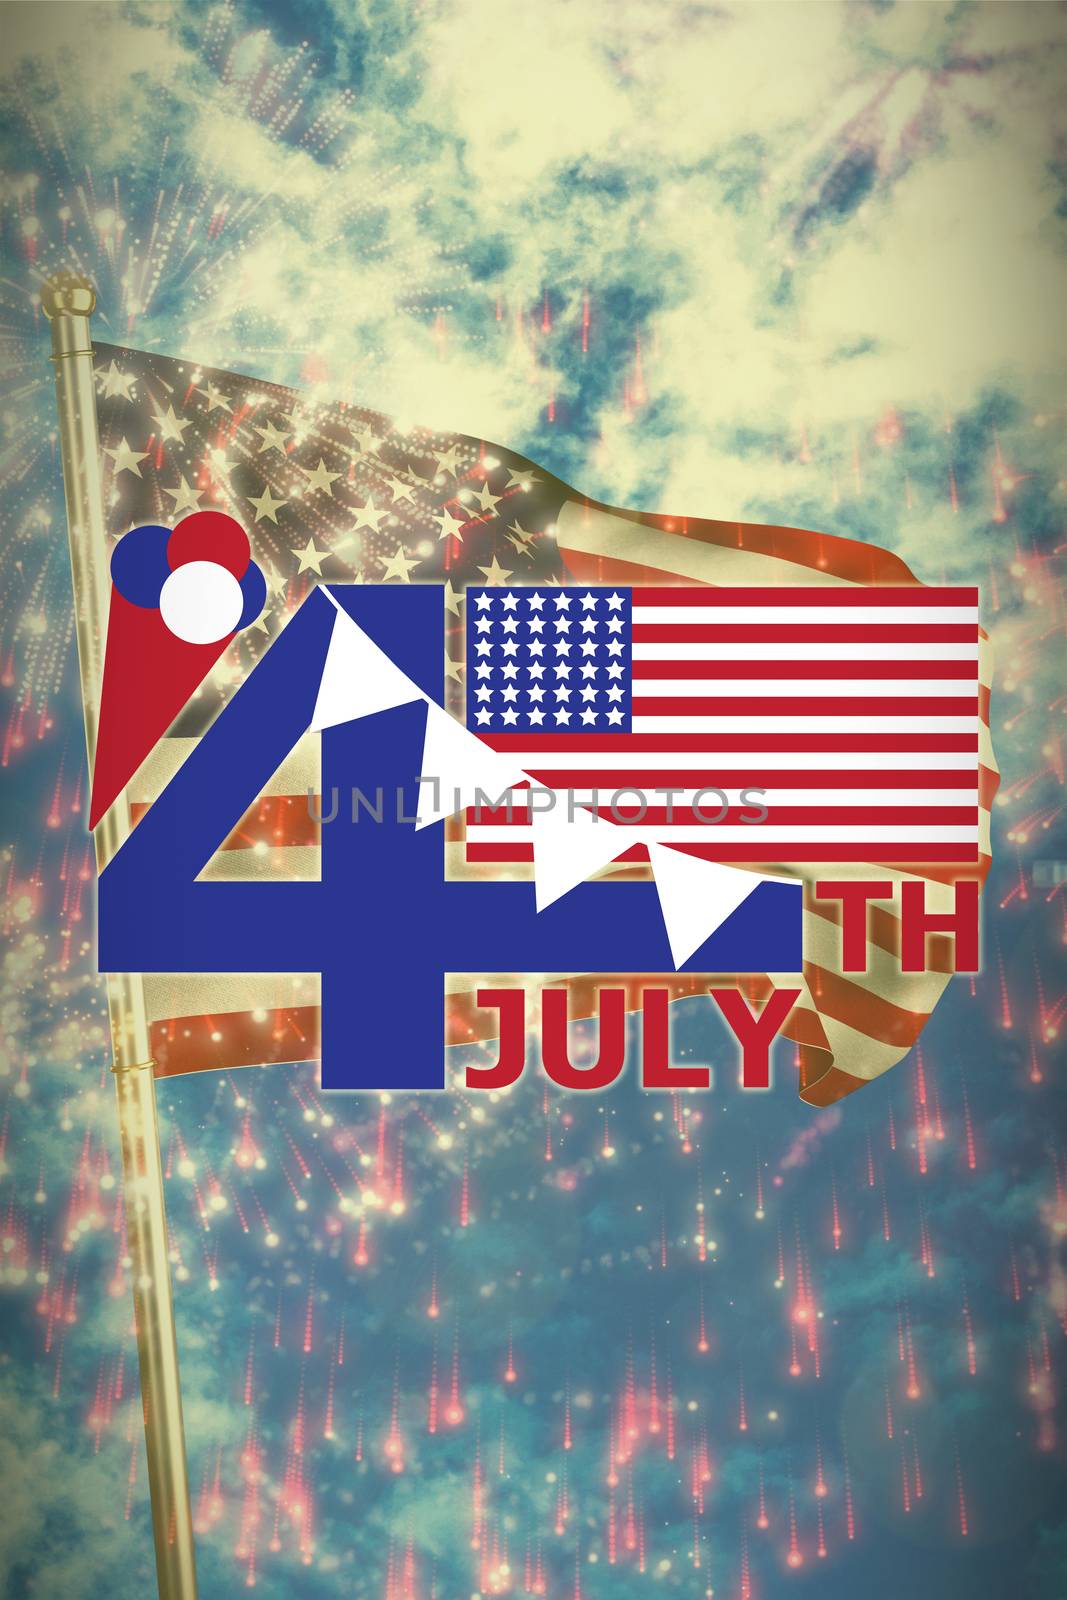 Vector image of 4th July text with flag and decoration  against colourful fireworks exploding on black background